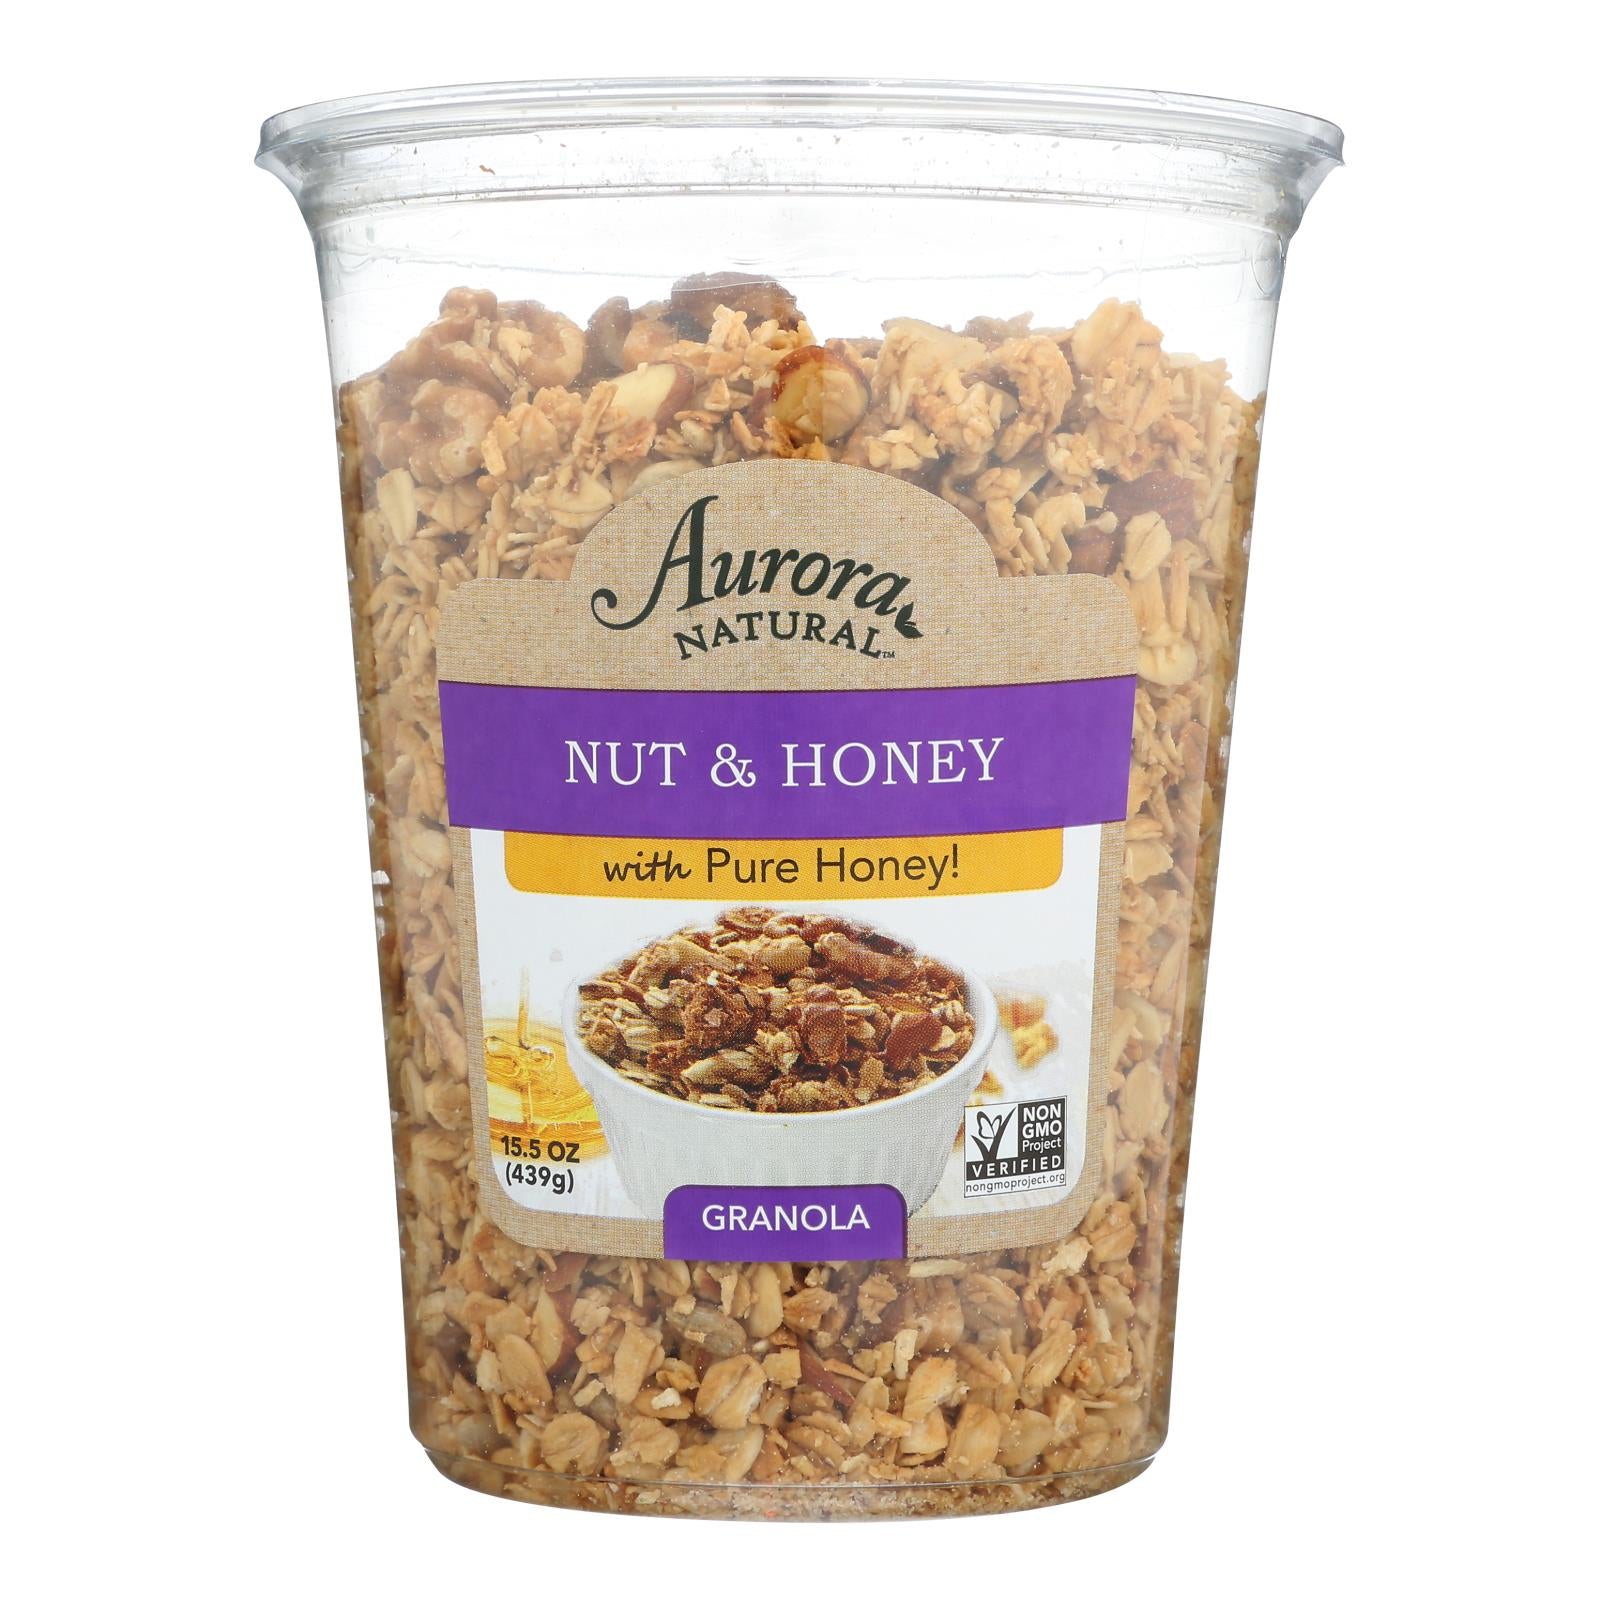 Aurora Natural Products, Aurora Natural Products - Nuts and Honey Granola - Case of 12 - 15.5 oz. (Pack of 12)